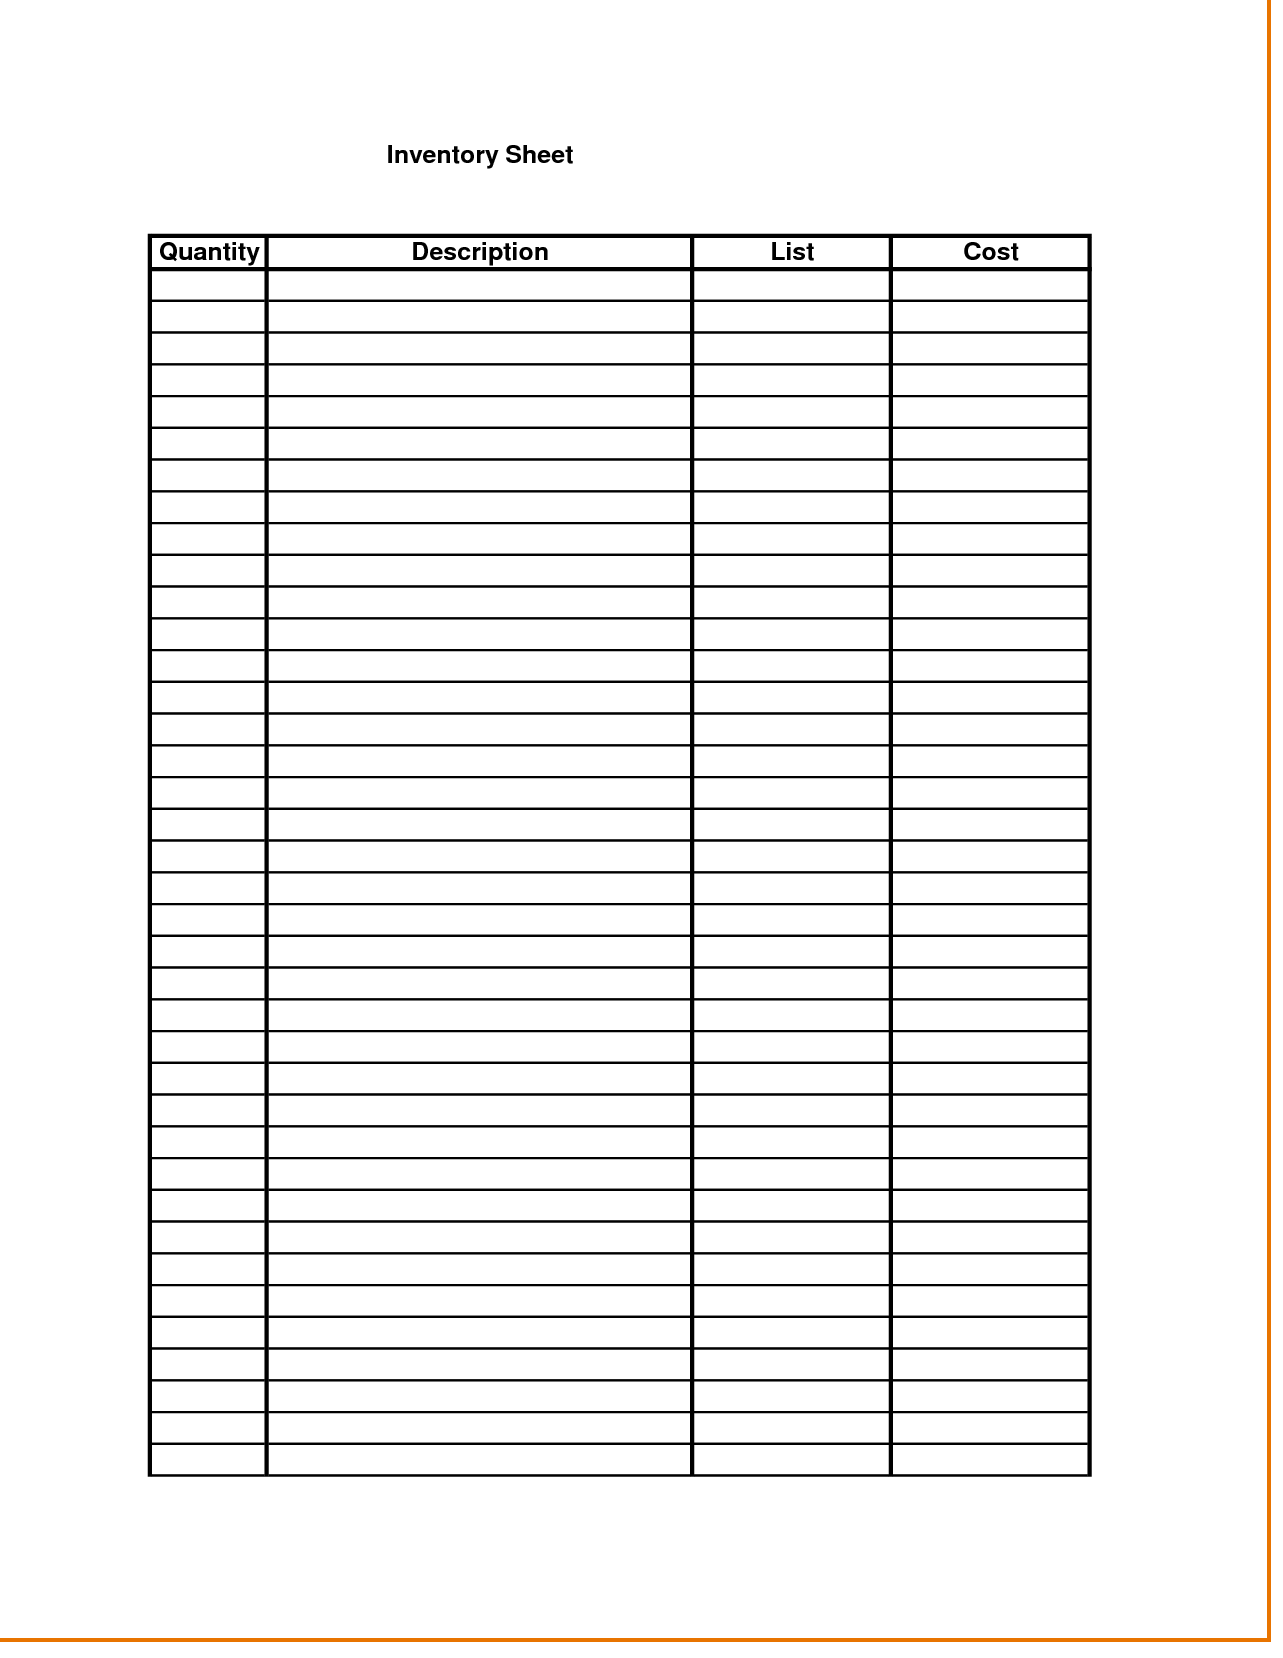 inventory-control-template-with-count-sheet-1-inventory-spreadsheet